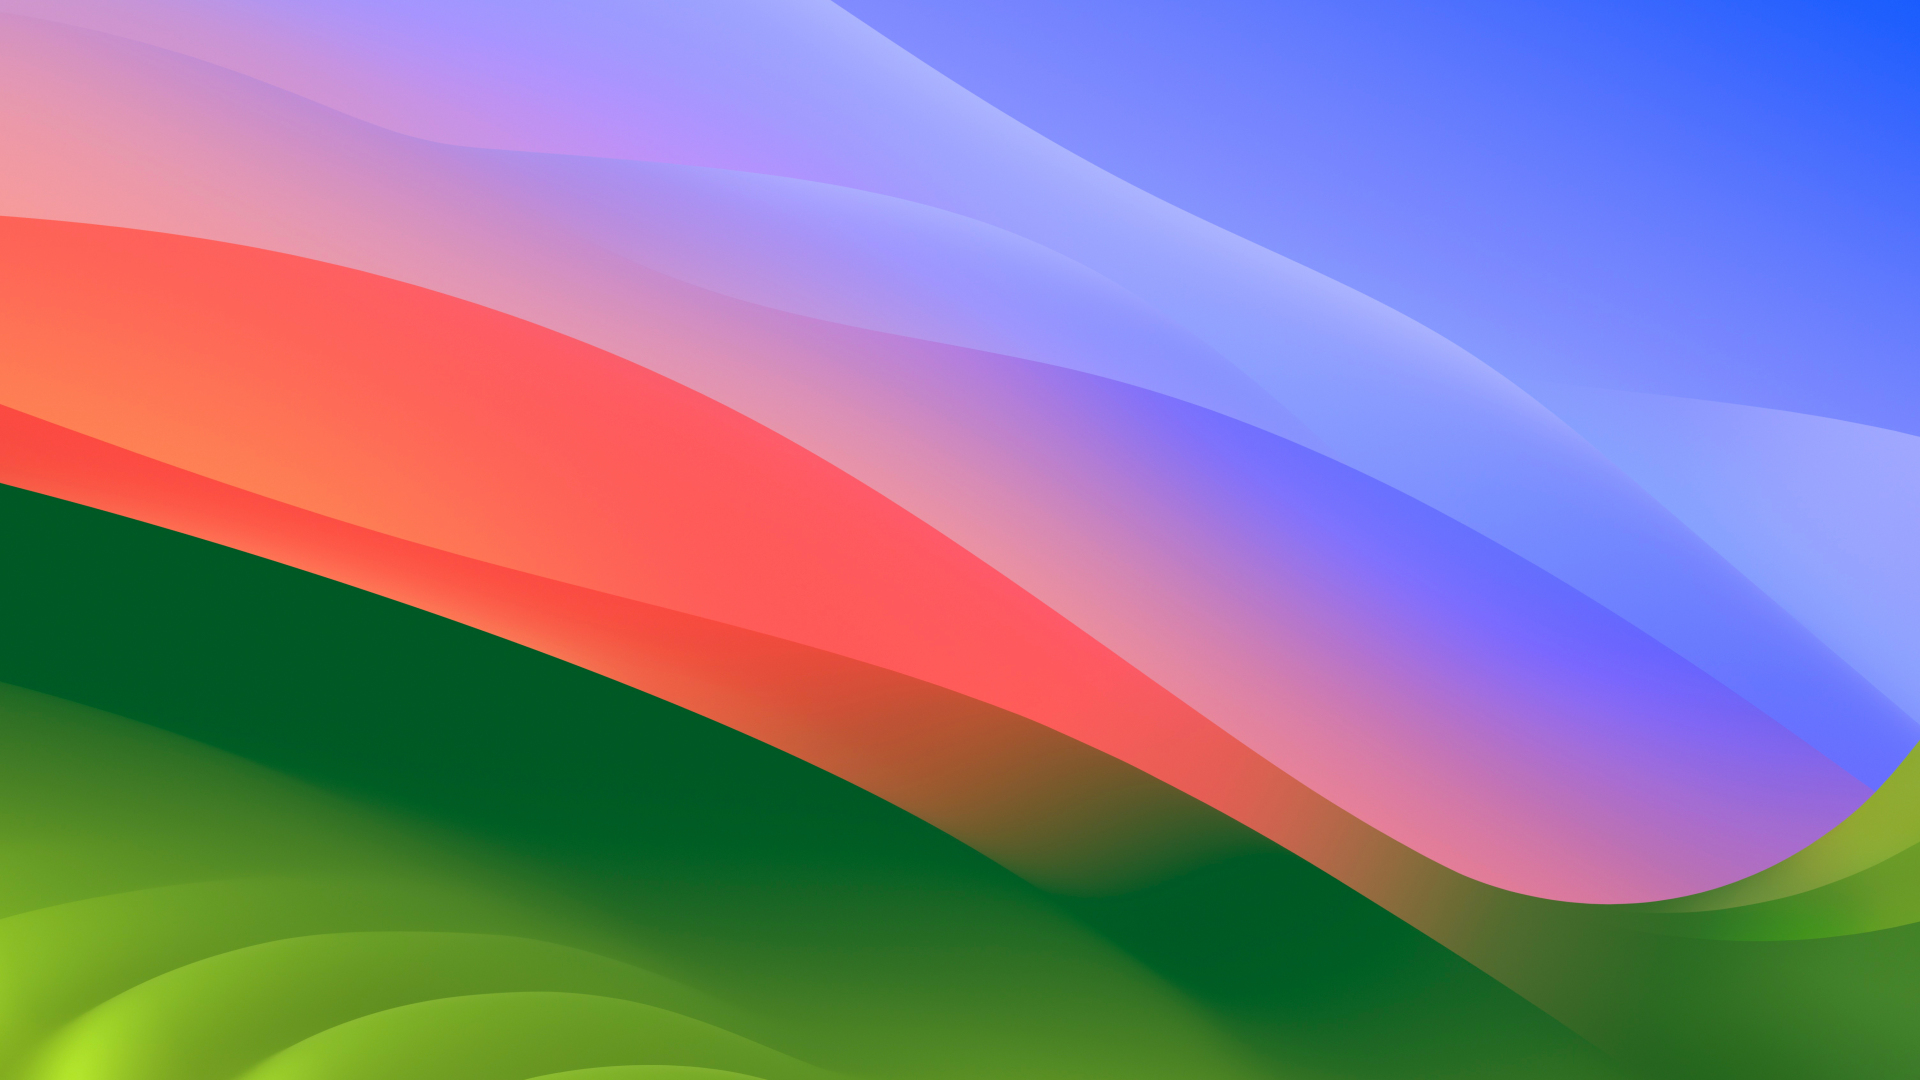 MacOS Sonoma, colorful waves, stock photo, 1920x1080 wallpaper